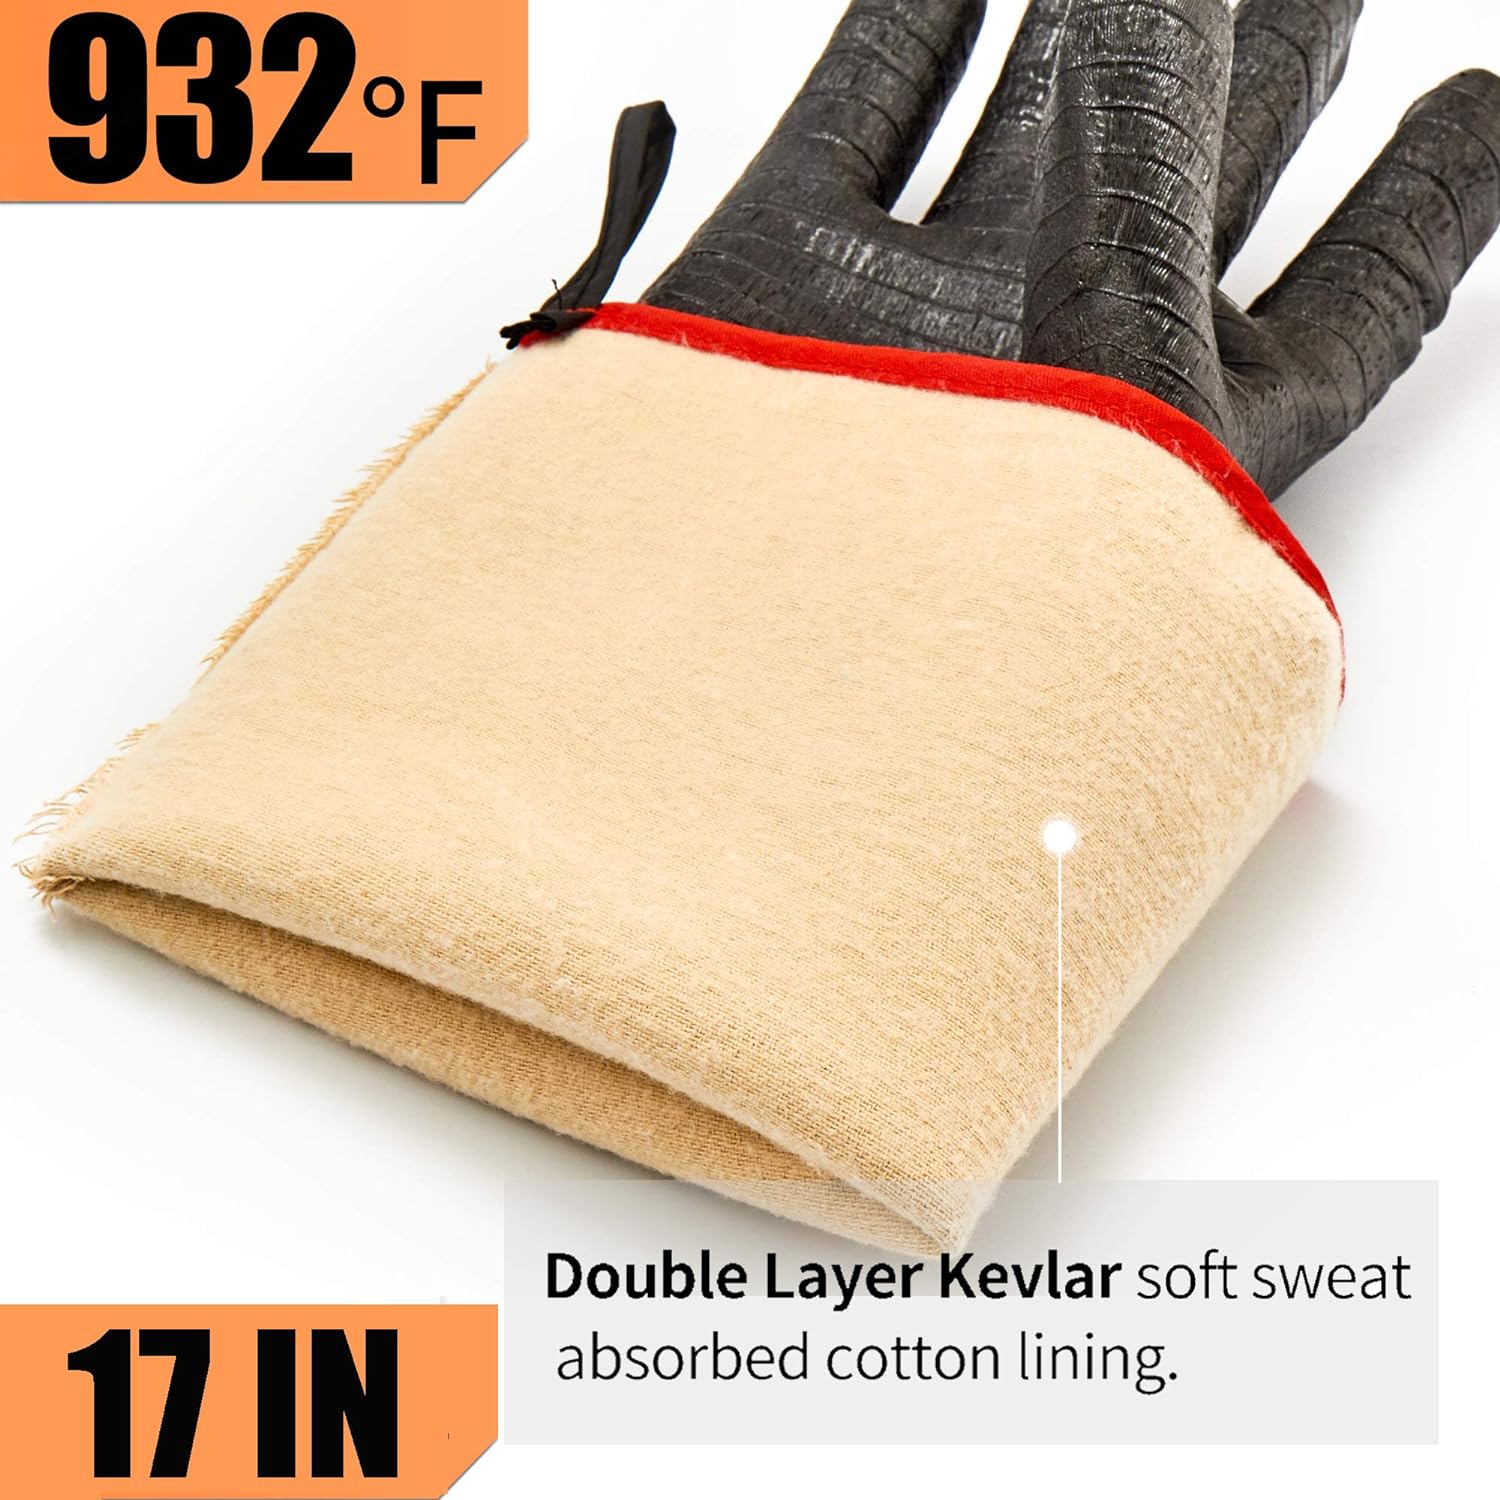 Fireplace Grilling BBQ Cloves BBQ Gloves Oven Mitt,Hand Protection from Grilling,Kitchen Double Layers Silicone CoatingHeat and Flame Resistant Up to 932°F Heat Resistant Cooking